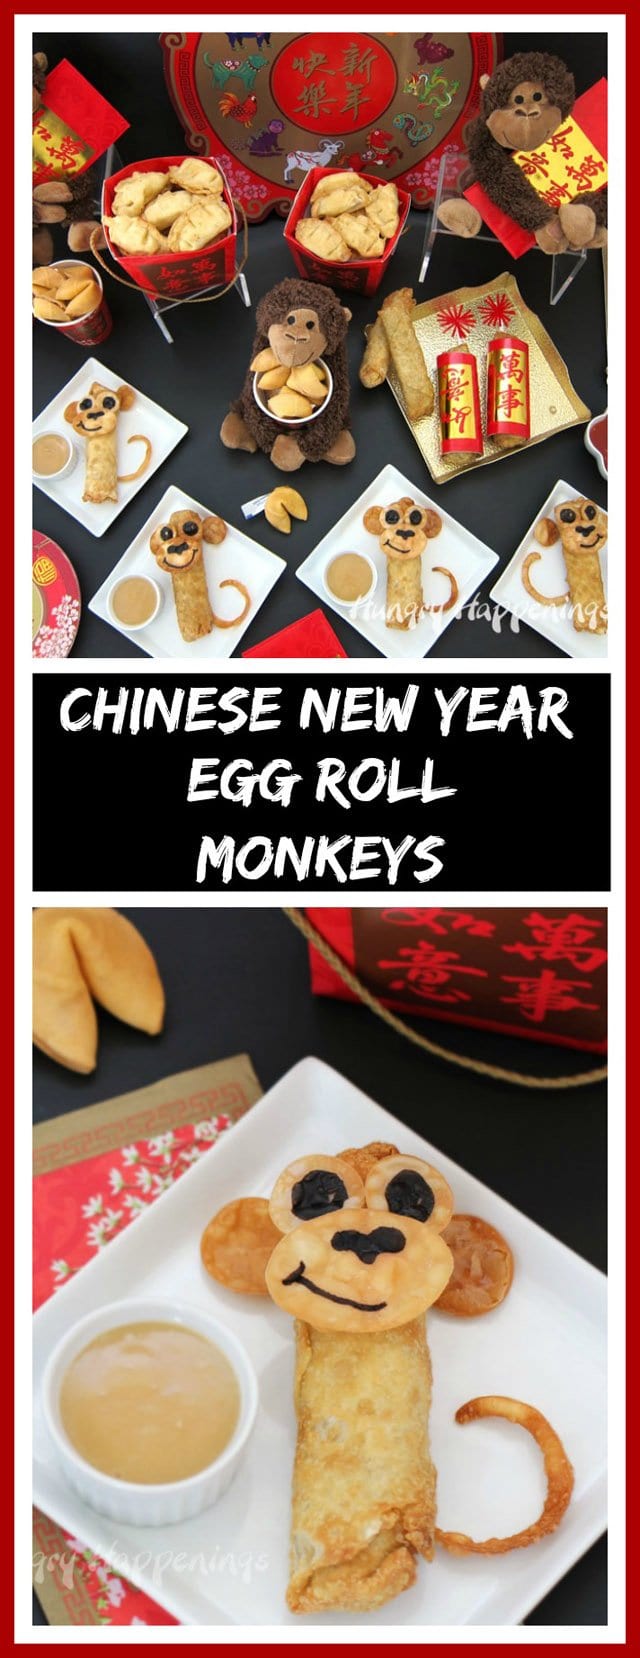 Celebrate the year of the monkey by crafting some Egg Roll Monkeys for your Chinese New Year party. See the tutorial at HungryHappenings.com.